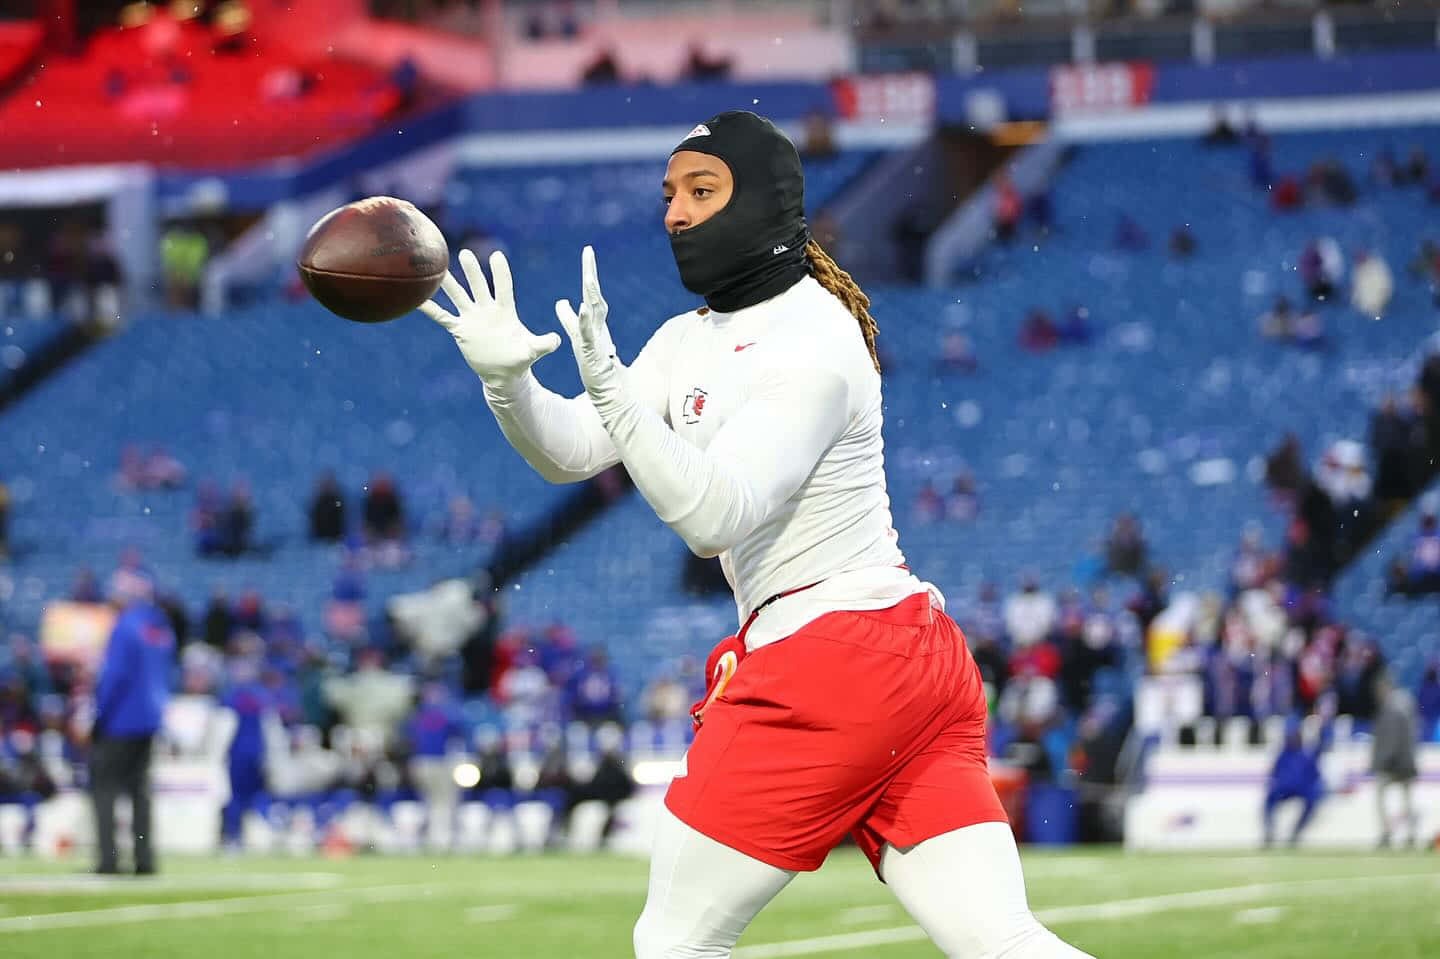 Football Player Catching Ball During Warmup Wallpaper